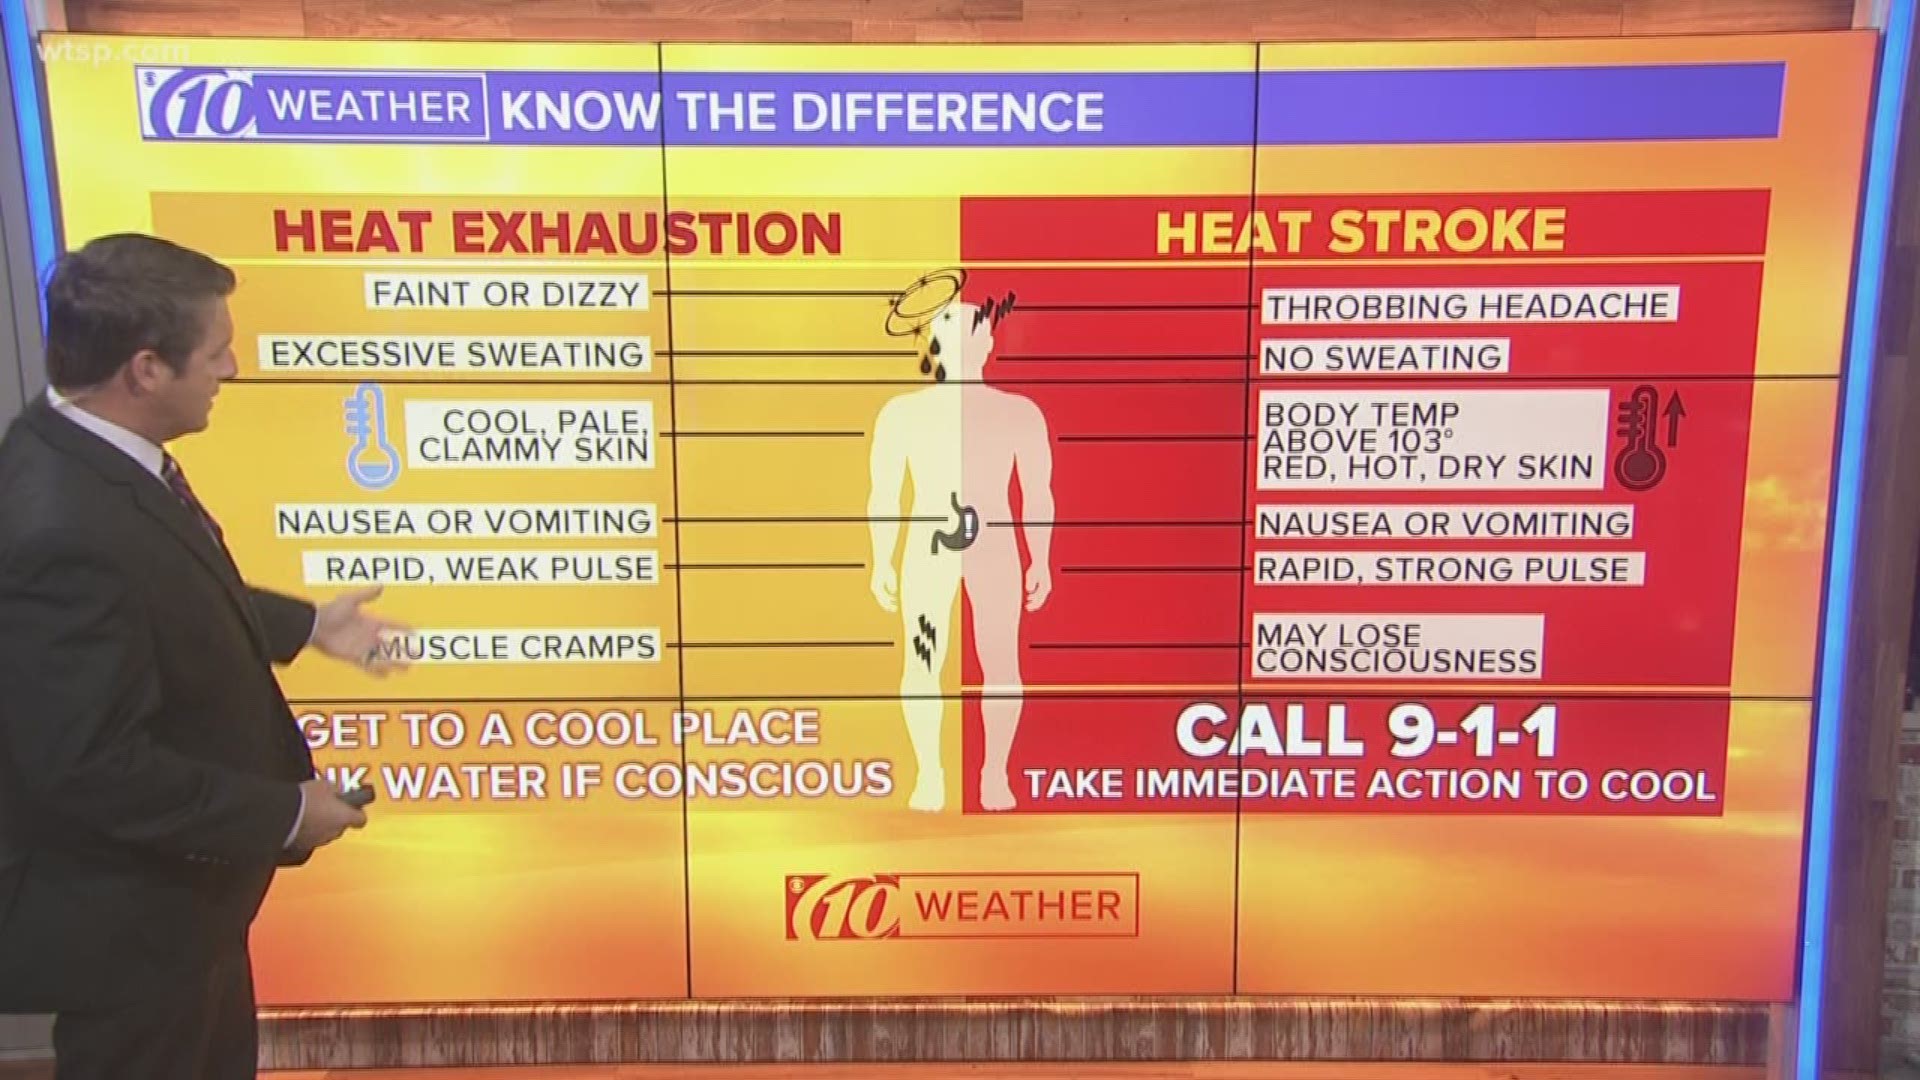 It's going to be a hot one this weekend. Here's the difference between heat exhaustion and heat stroke.